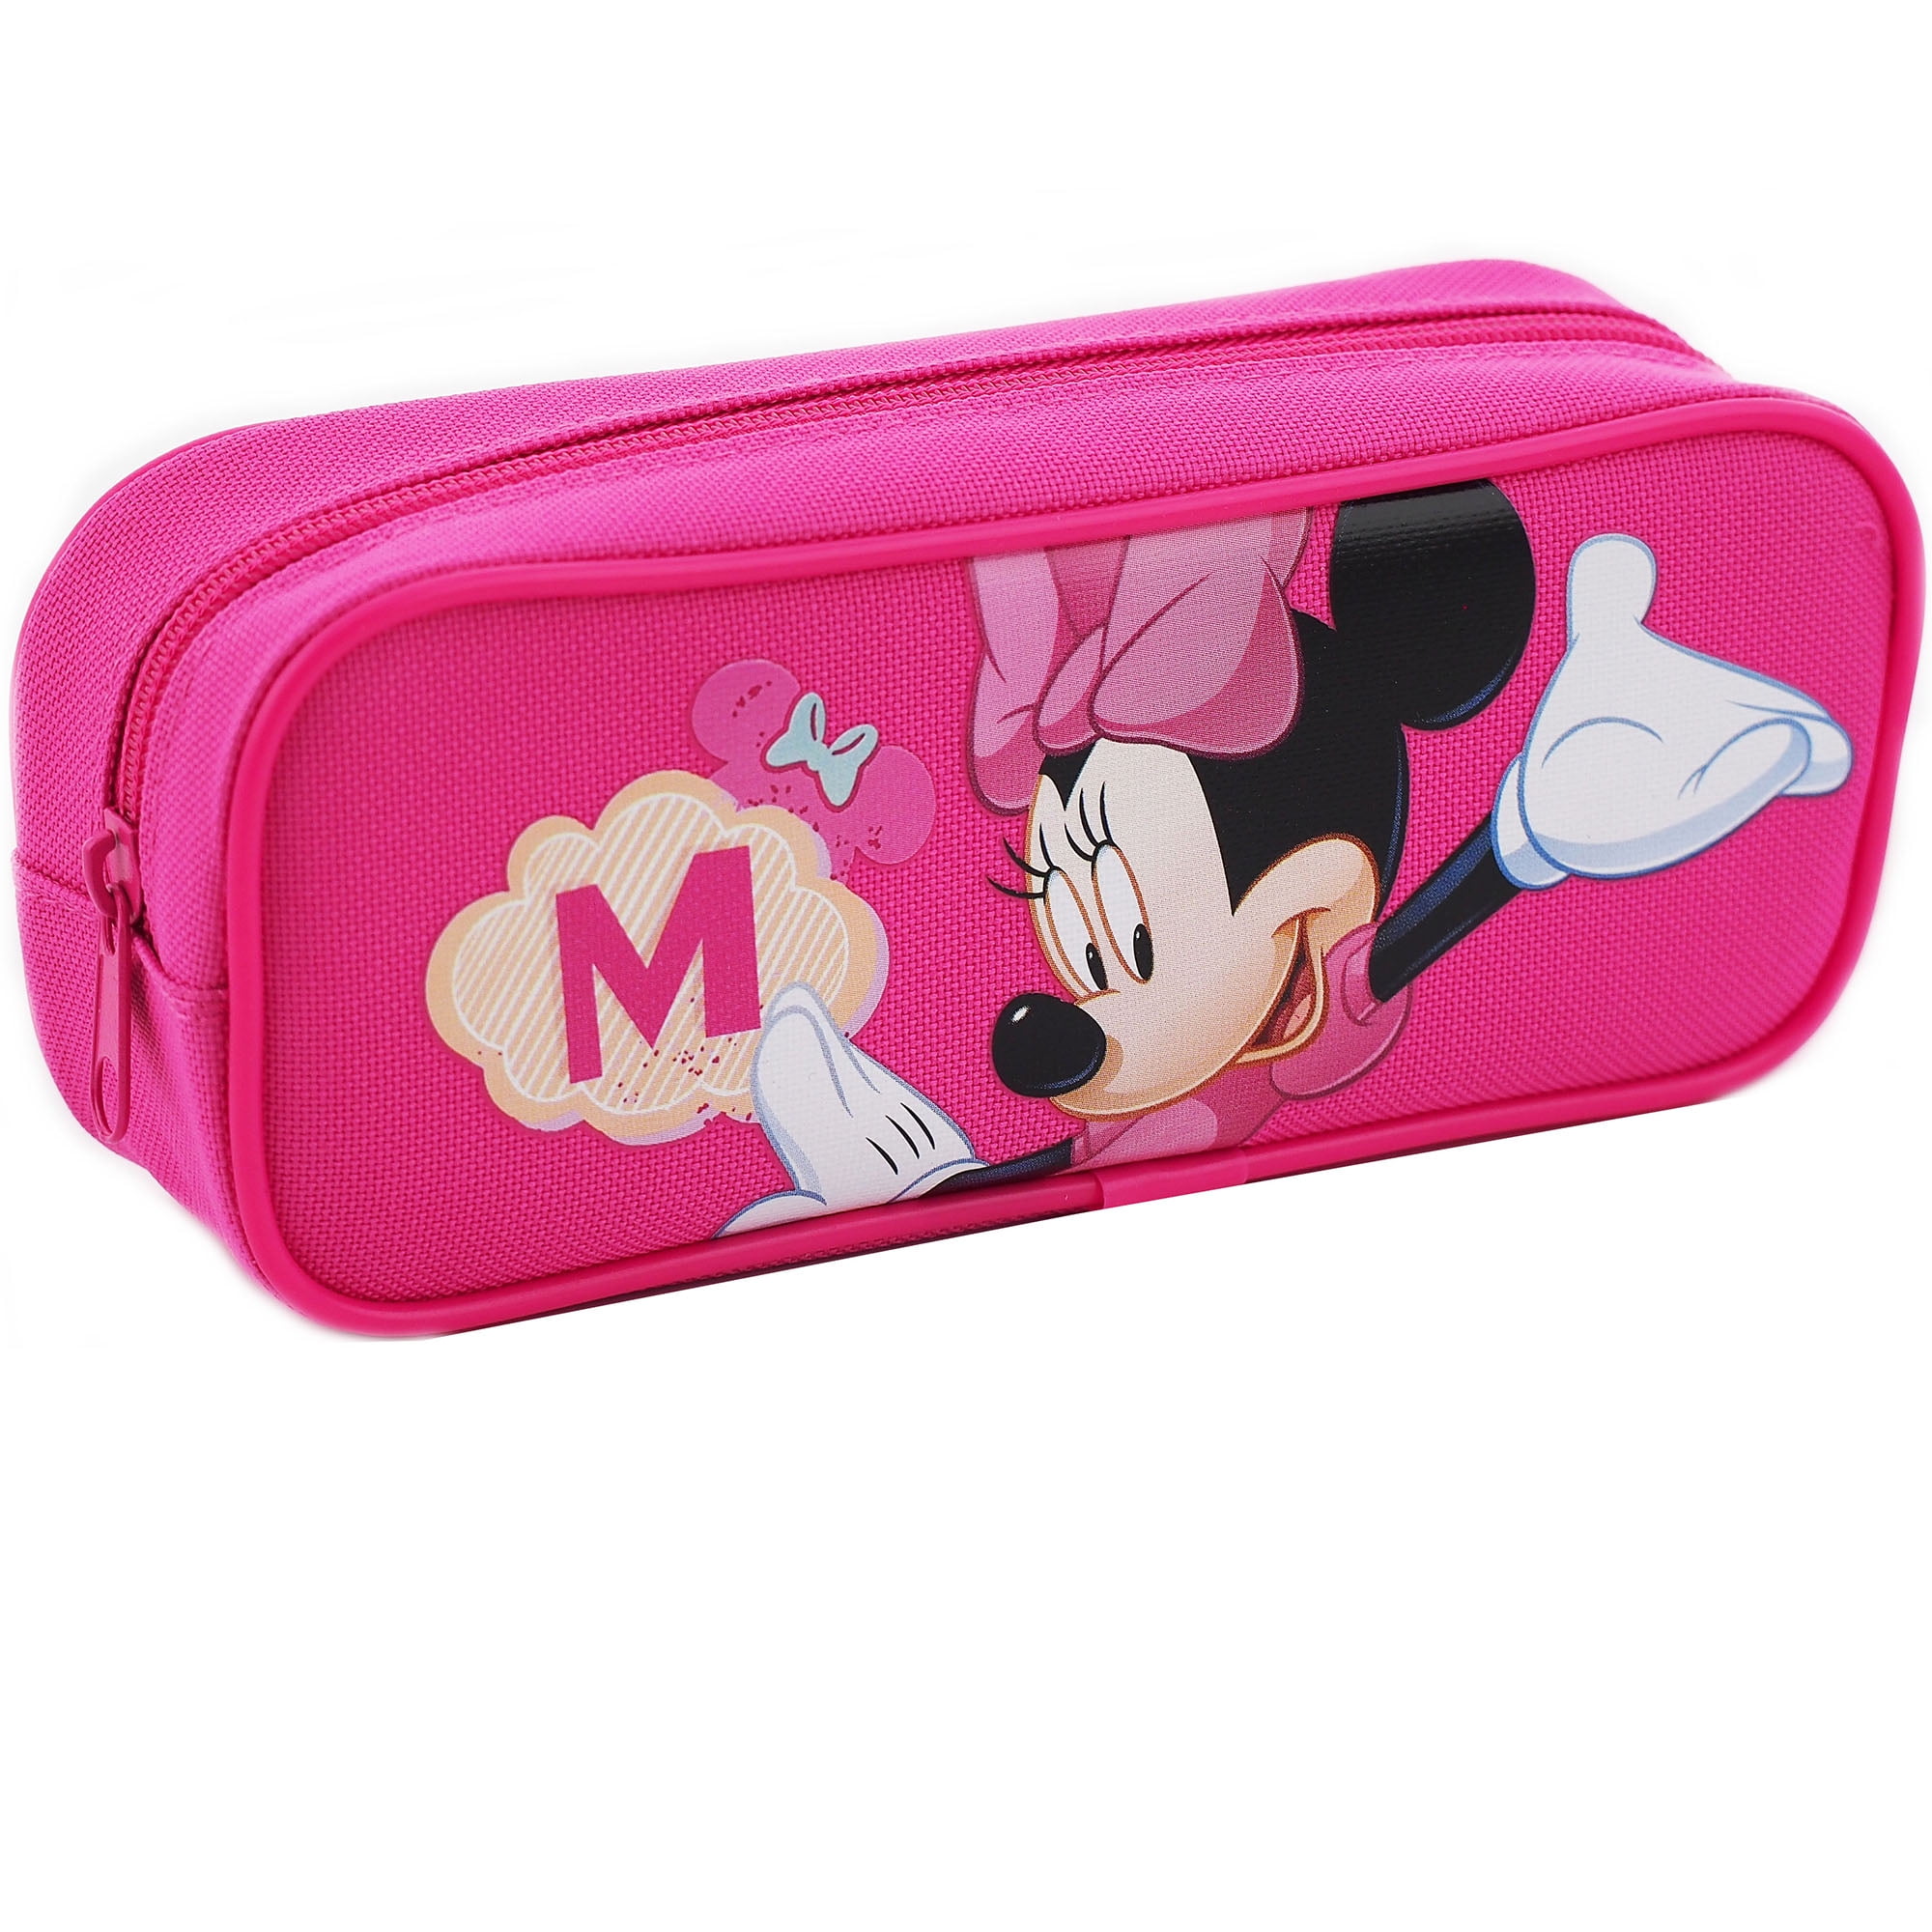 DISNEY STORE Minnie Mouse Pencil Case With Contents  RRP £10.99 